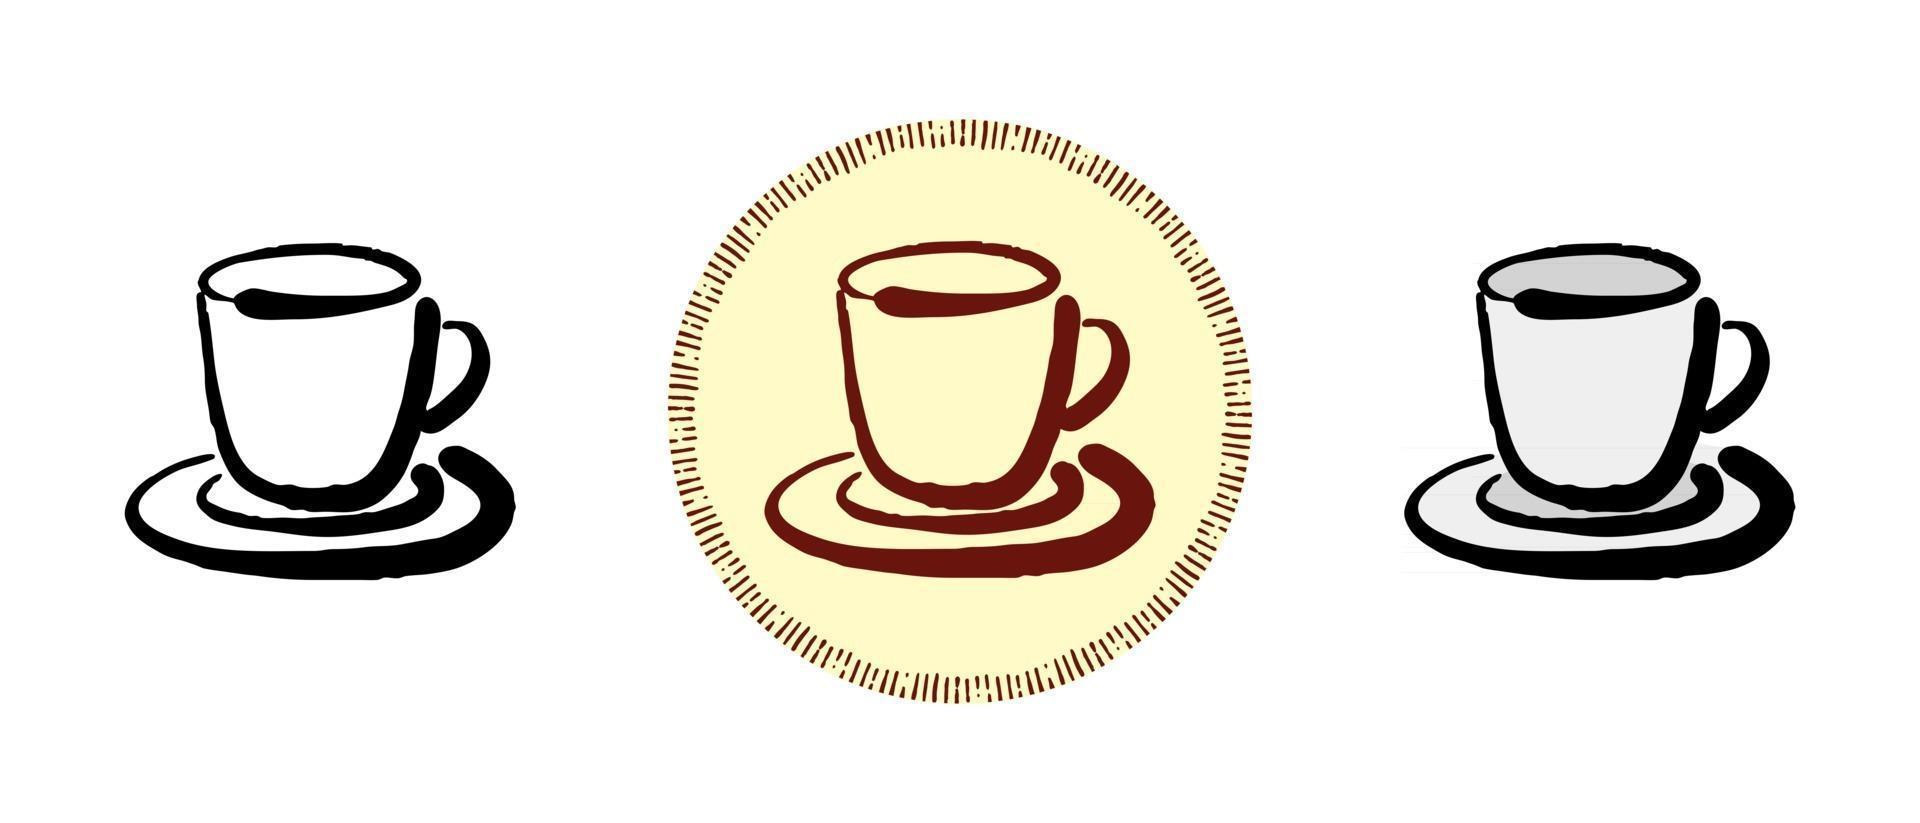 Contour and color and retro symbols of a cup and saucer vector